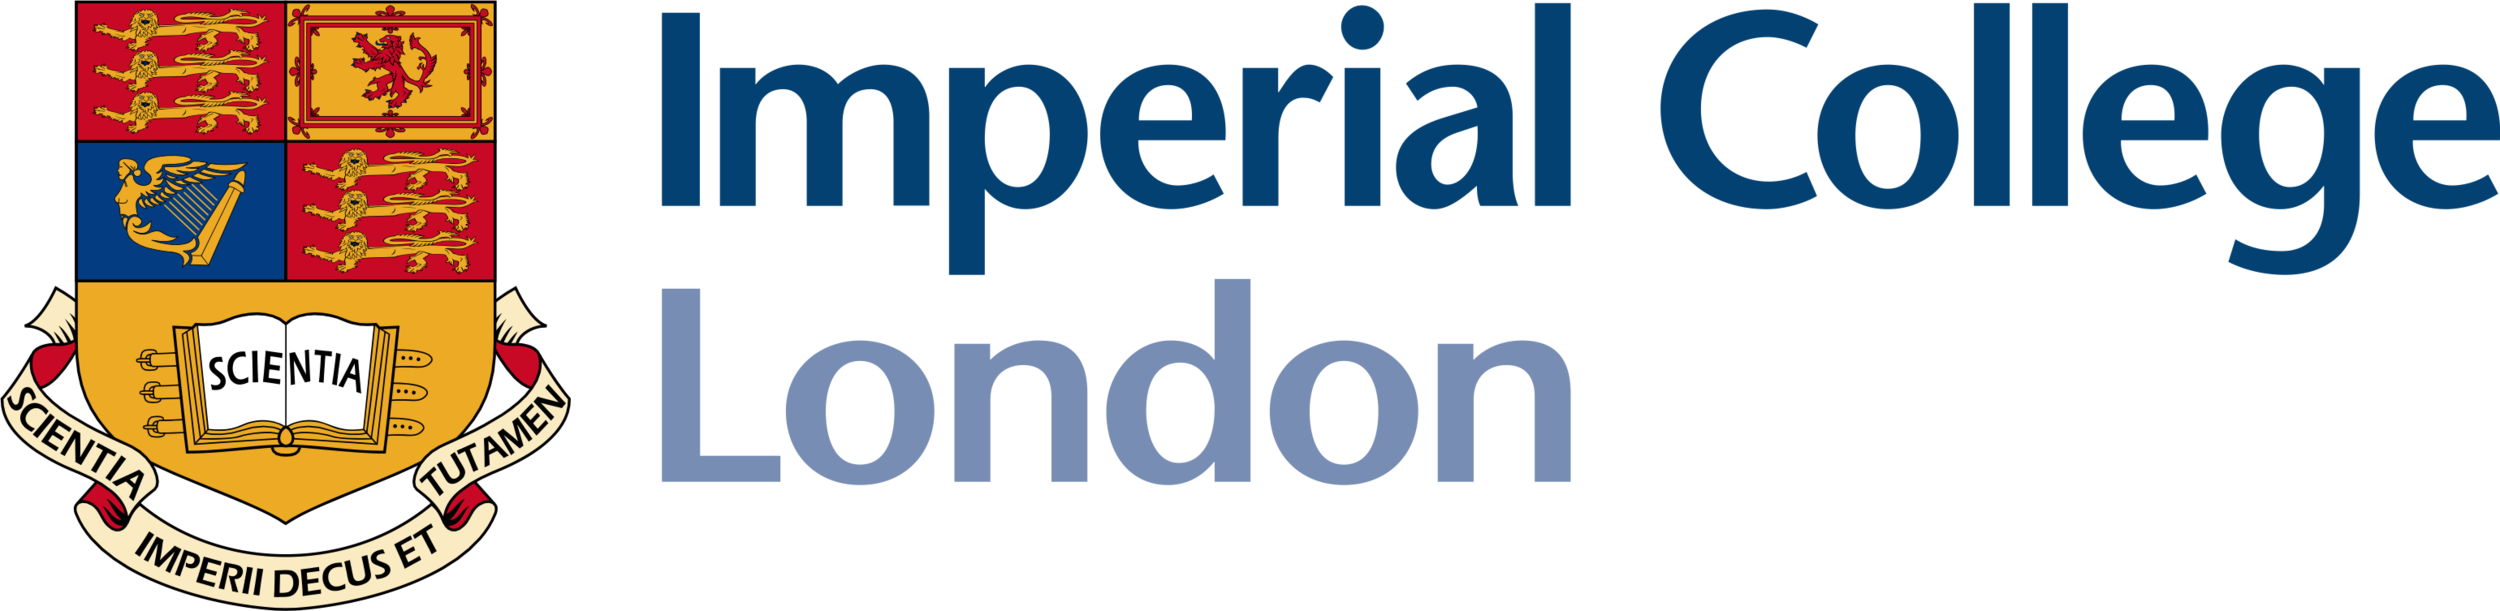 Imperial College London logo.png